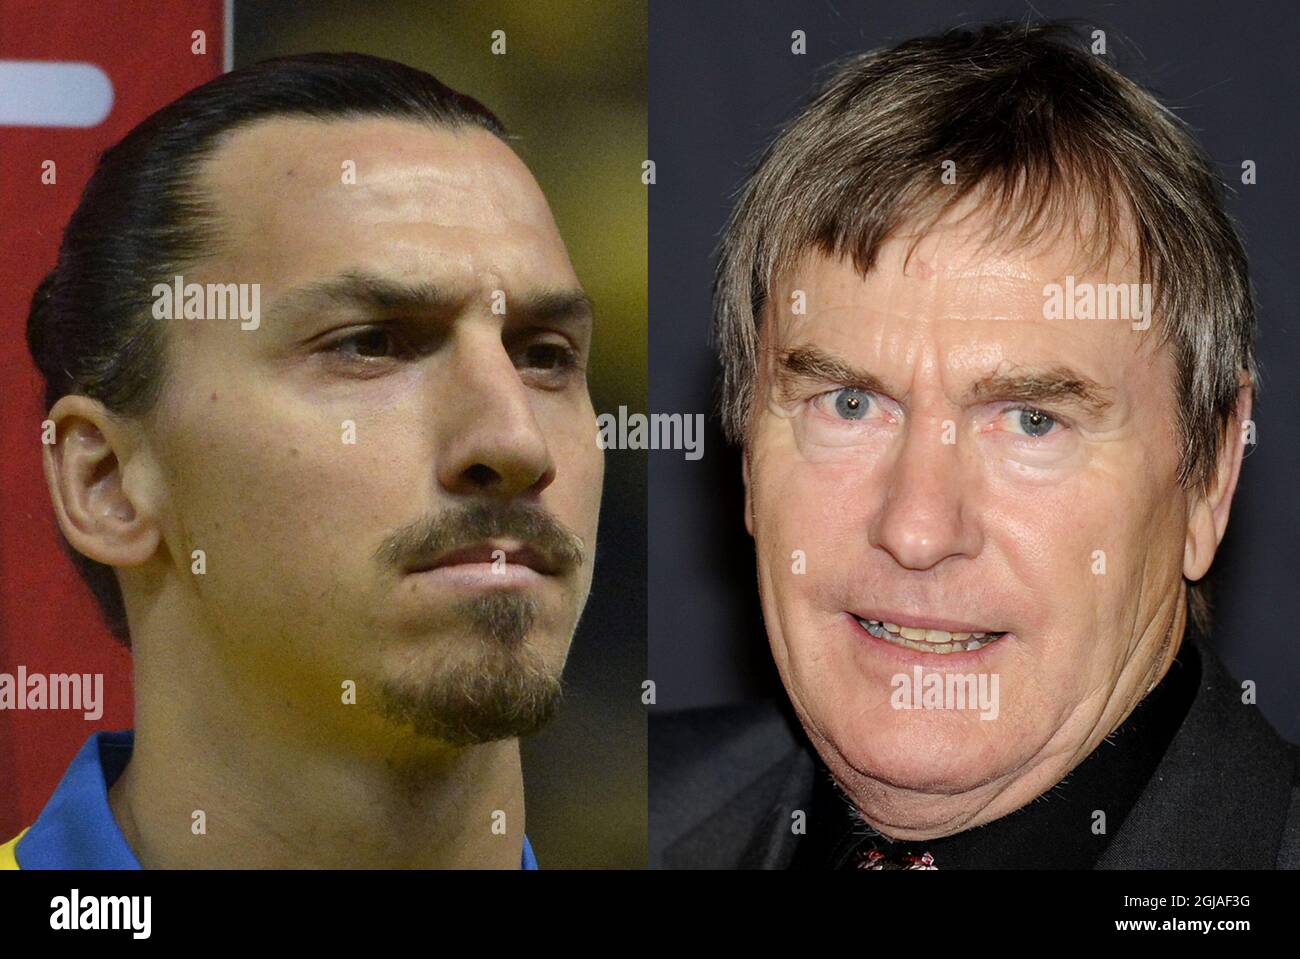 STOCKHOLM 20151114 File Ulf Karlsson , former head Coach of Sweden`s Track and Field team was Monday, January 9, sentenced for slander after accusing SwedenÂ’s top footballer Zlatan Ibrahimovic for doping. Foto: TT / Kod 10010  Stock Photo